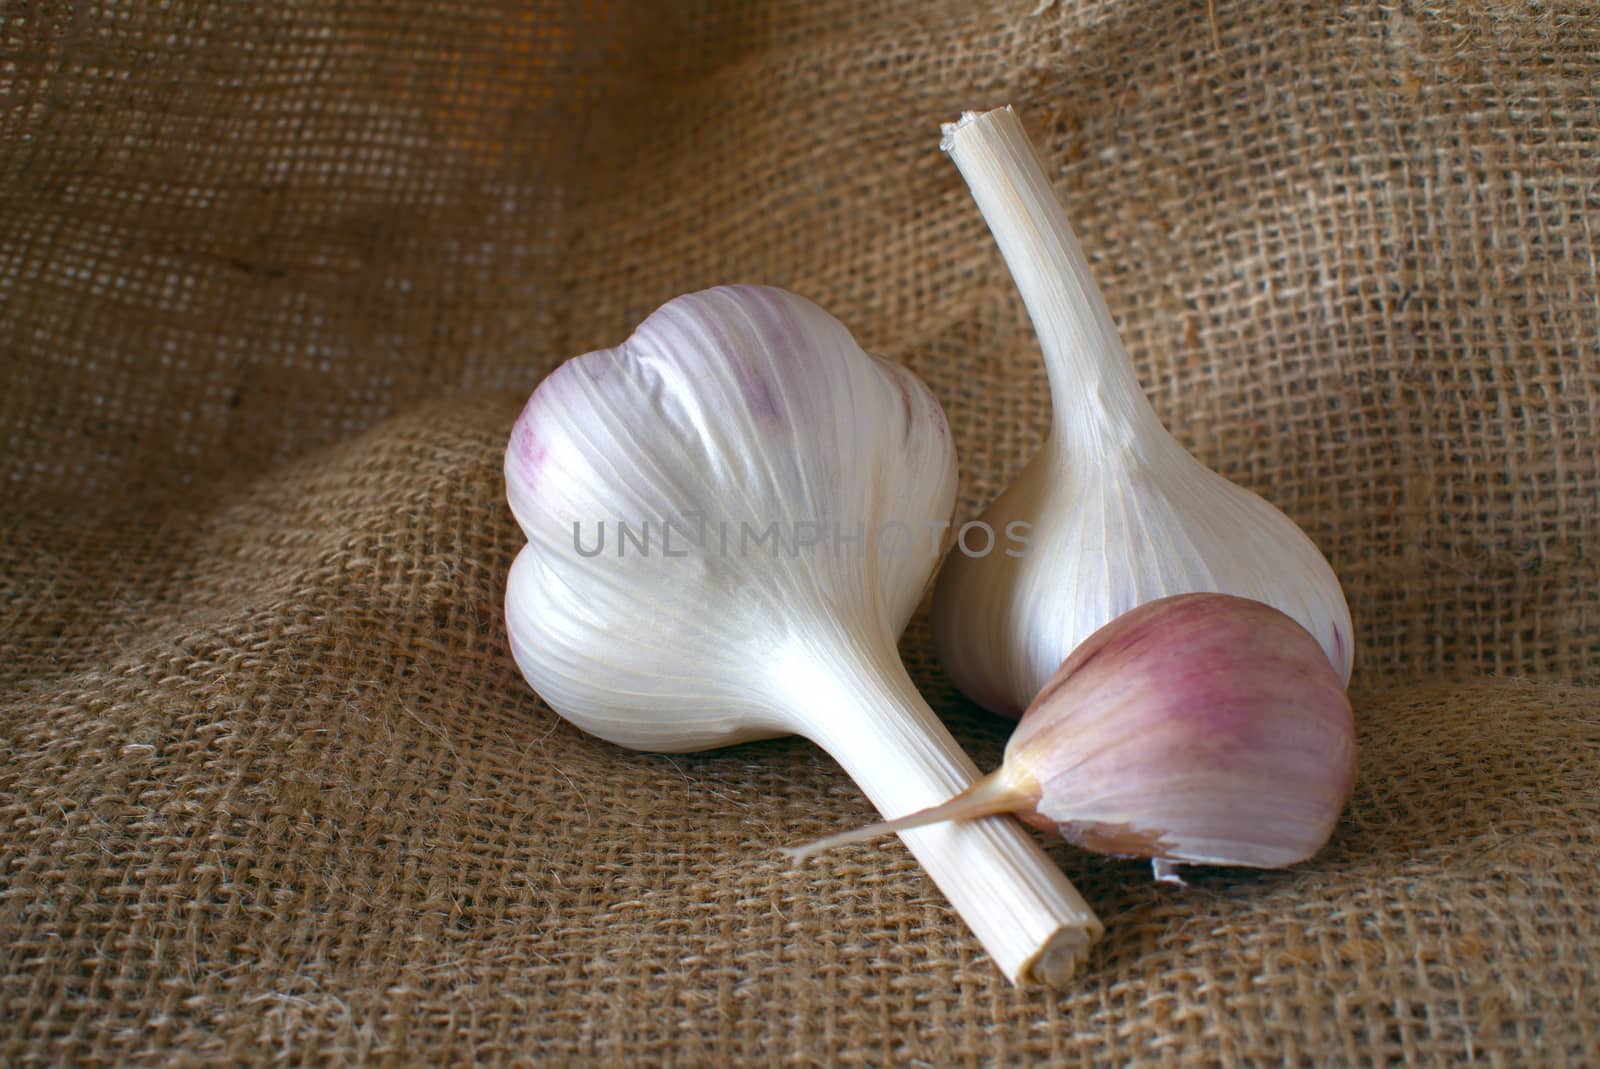 Garlic bulbs and cloves in close-up on brown sack cloth